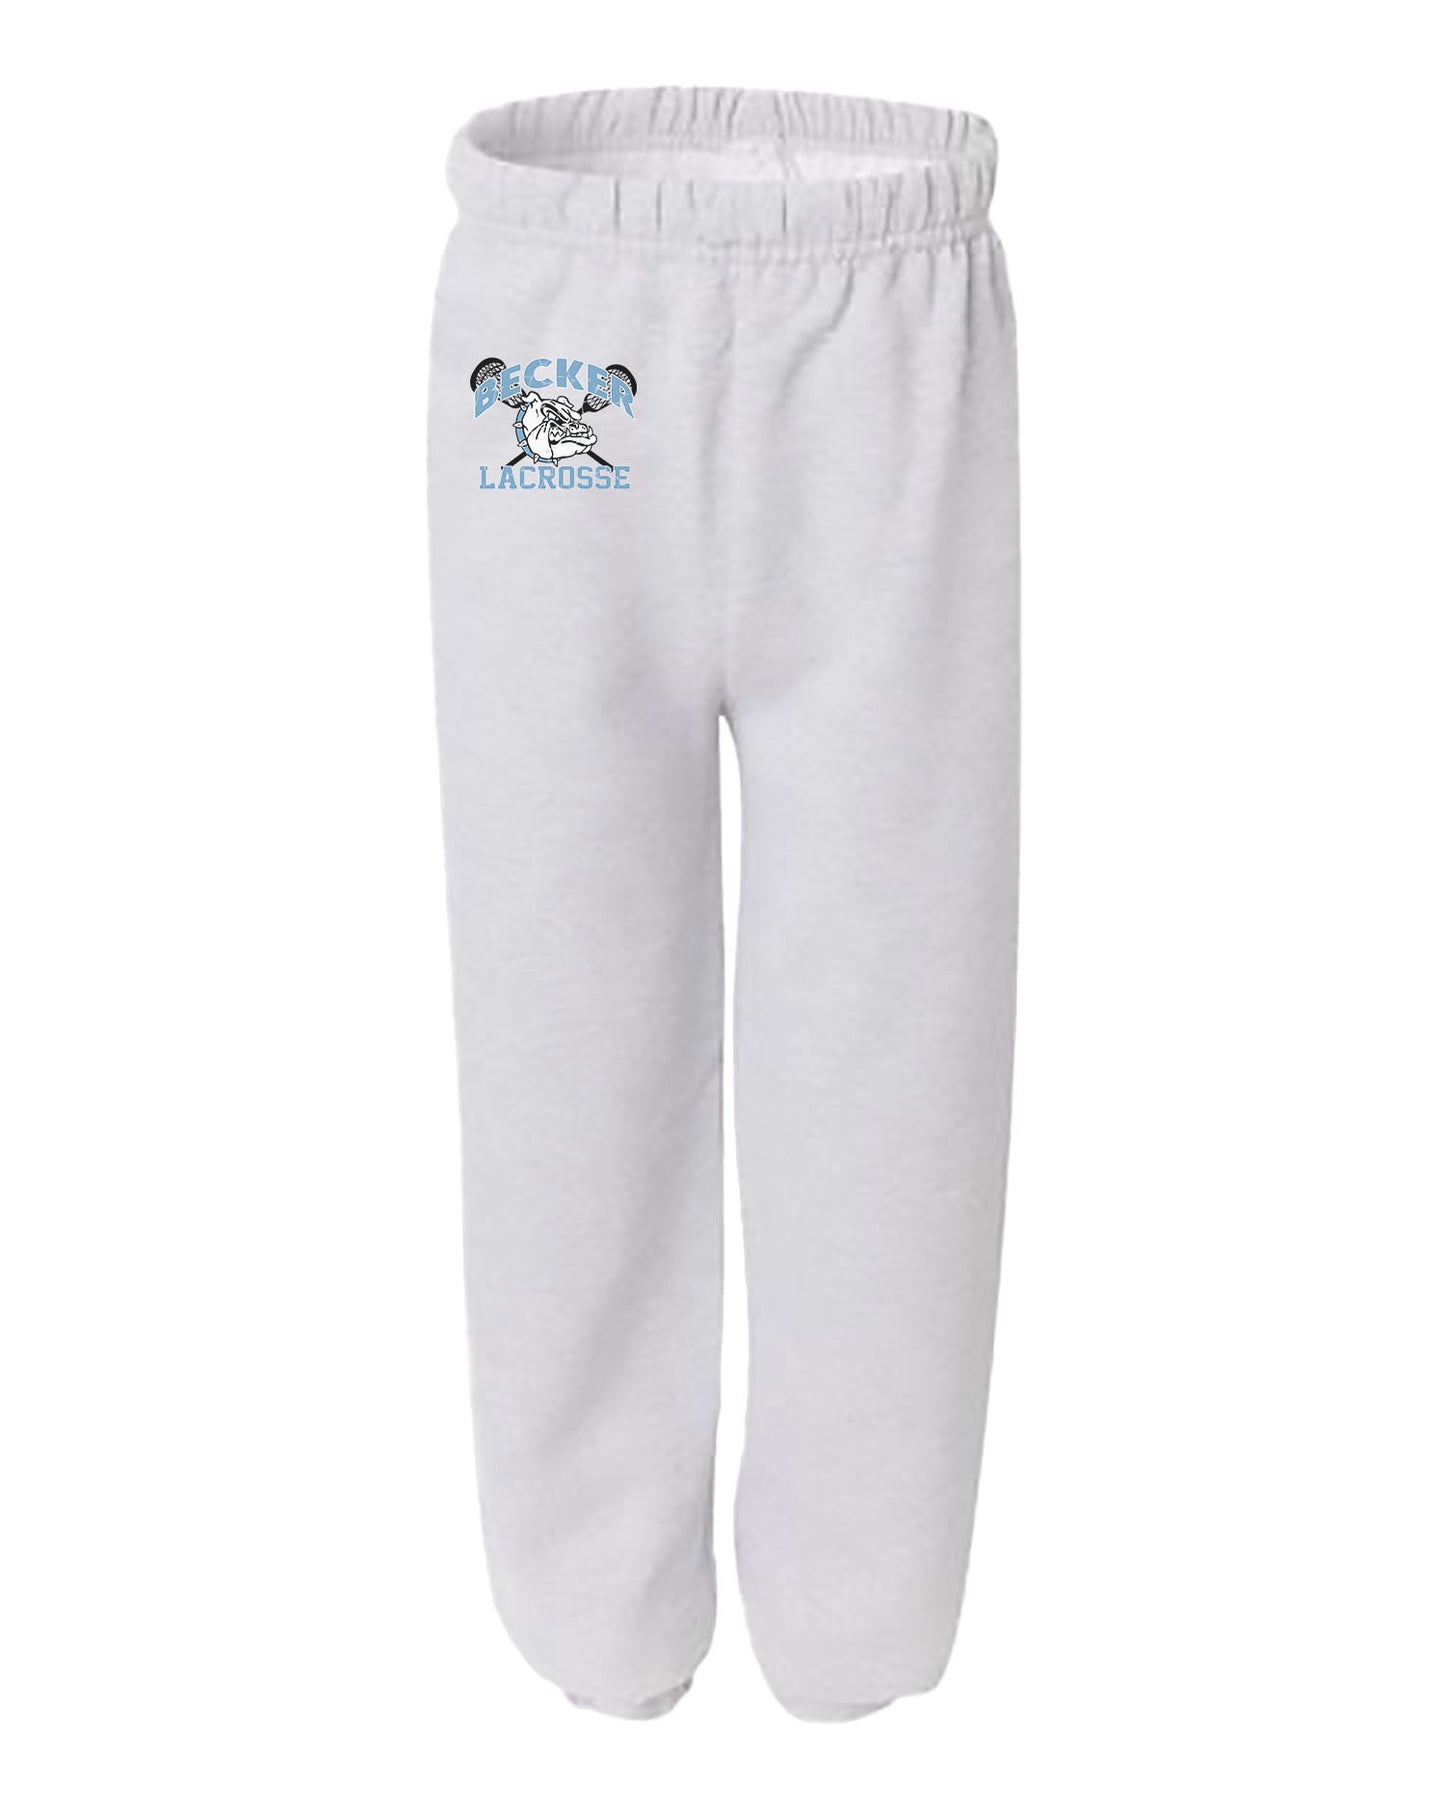 Becker Lacrosse // Youth Joggers